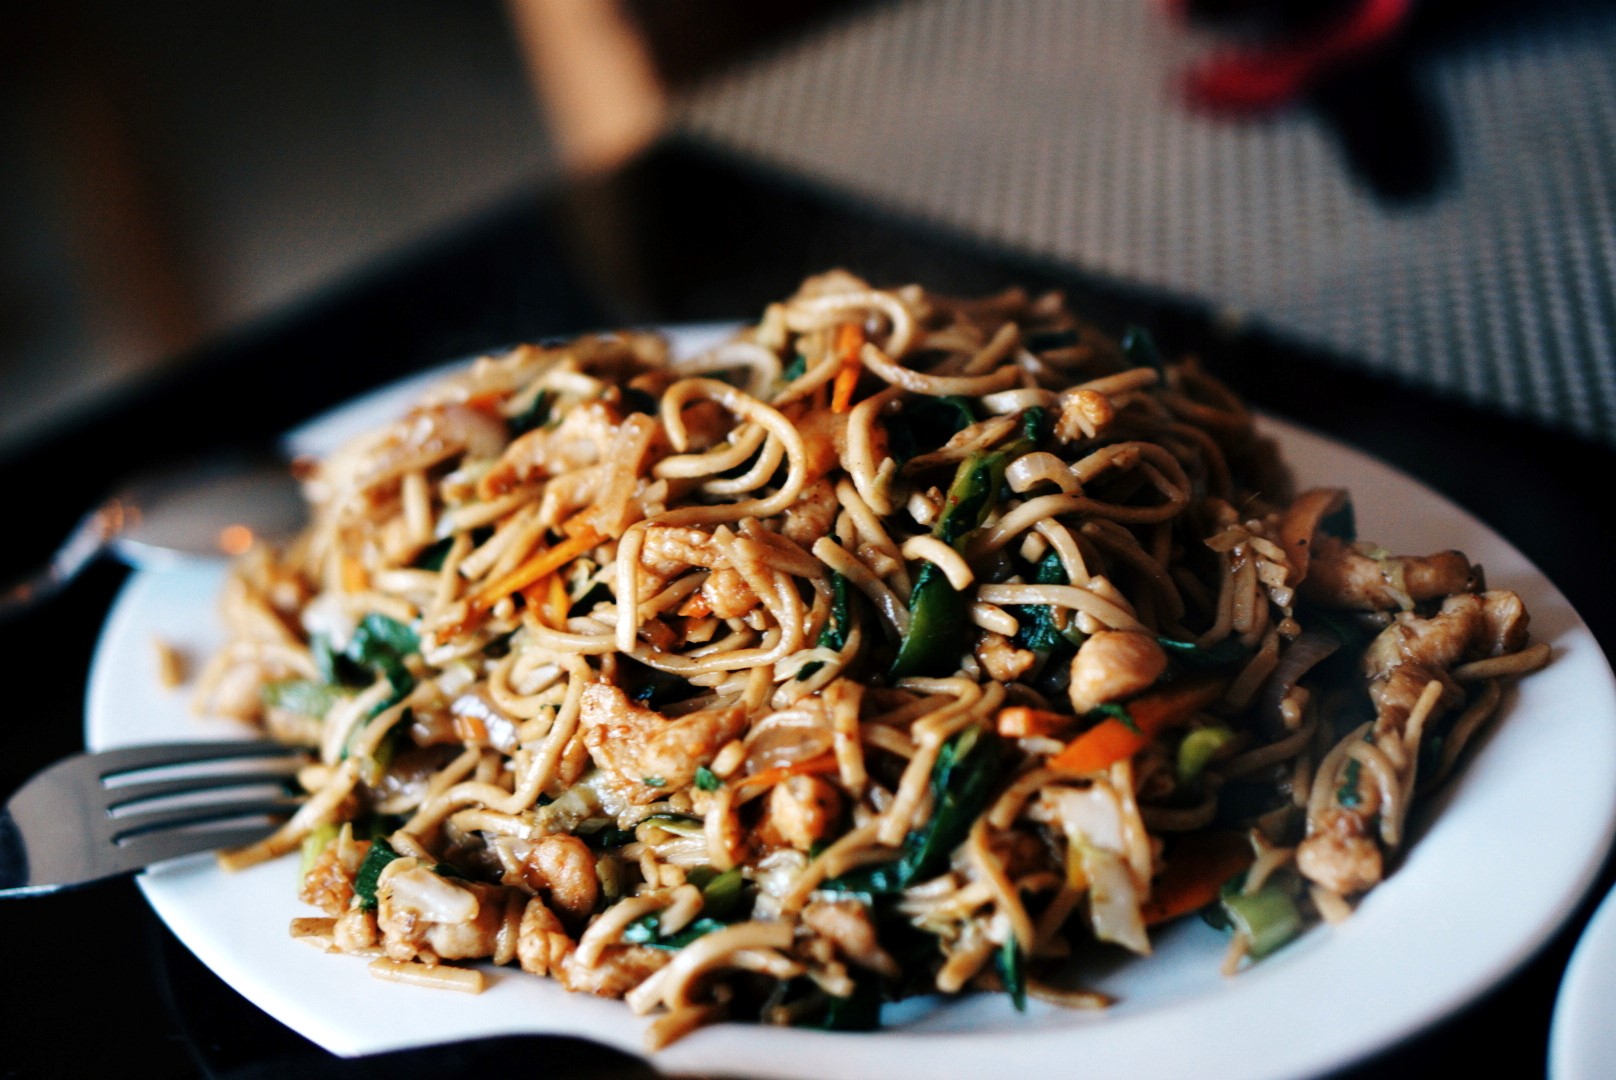 Fried Noodles at Gypsy's restaurant lagos